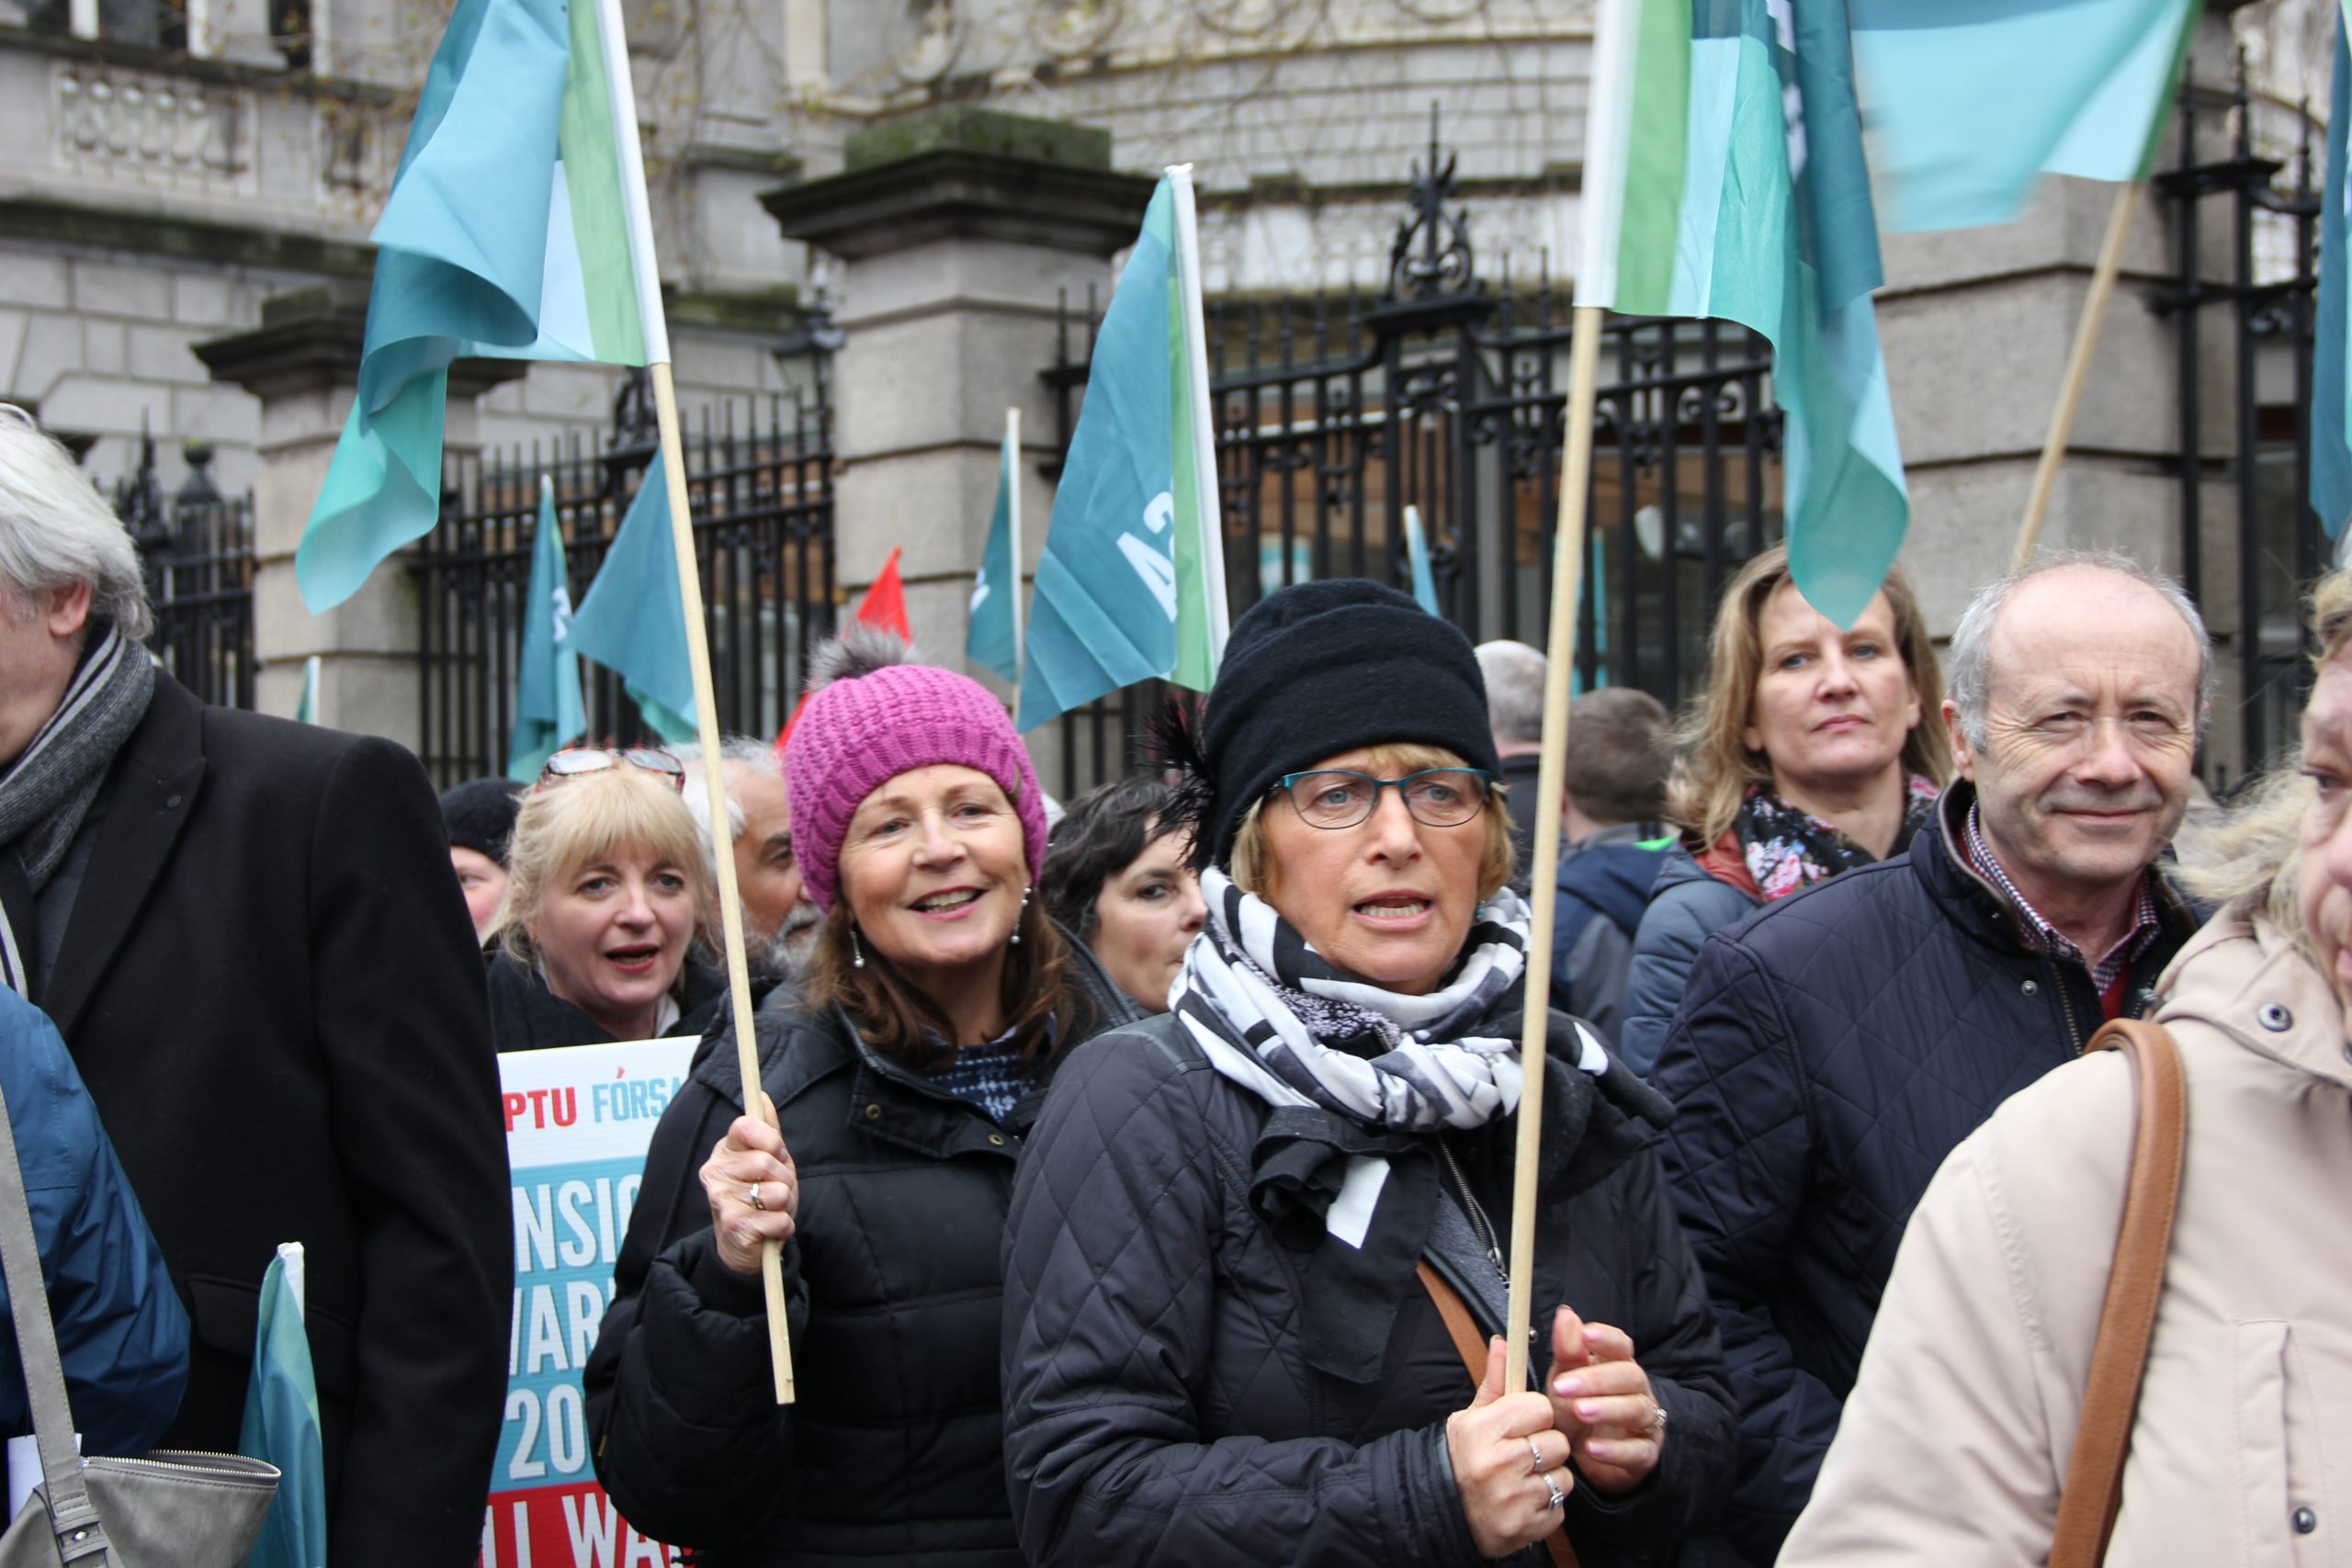 CE scheme Fórsa members at a protest, representing community workers backing new pay deal